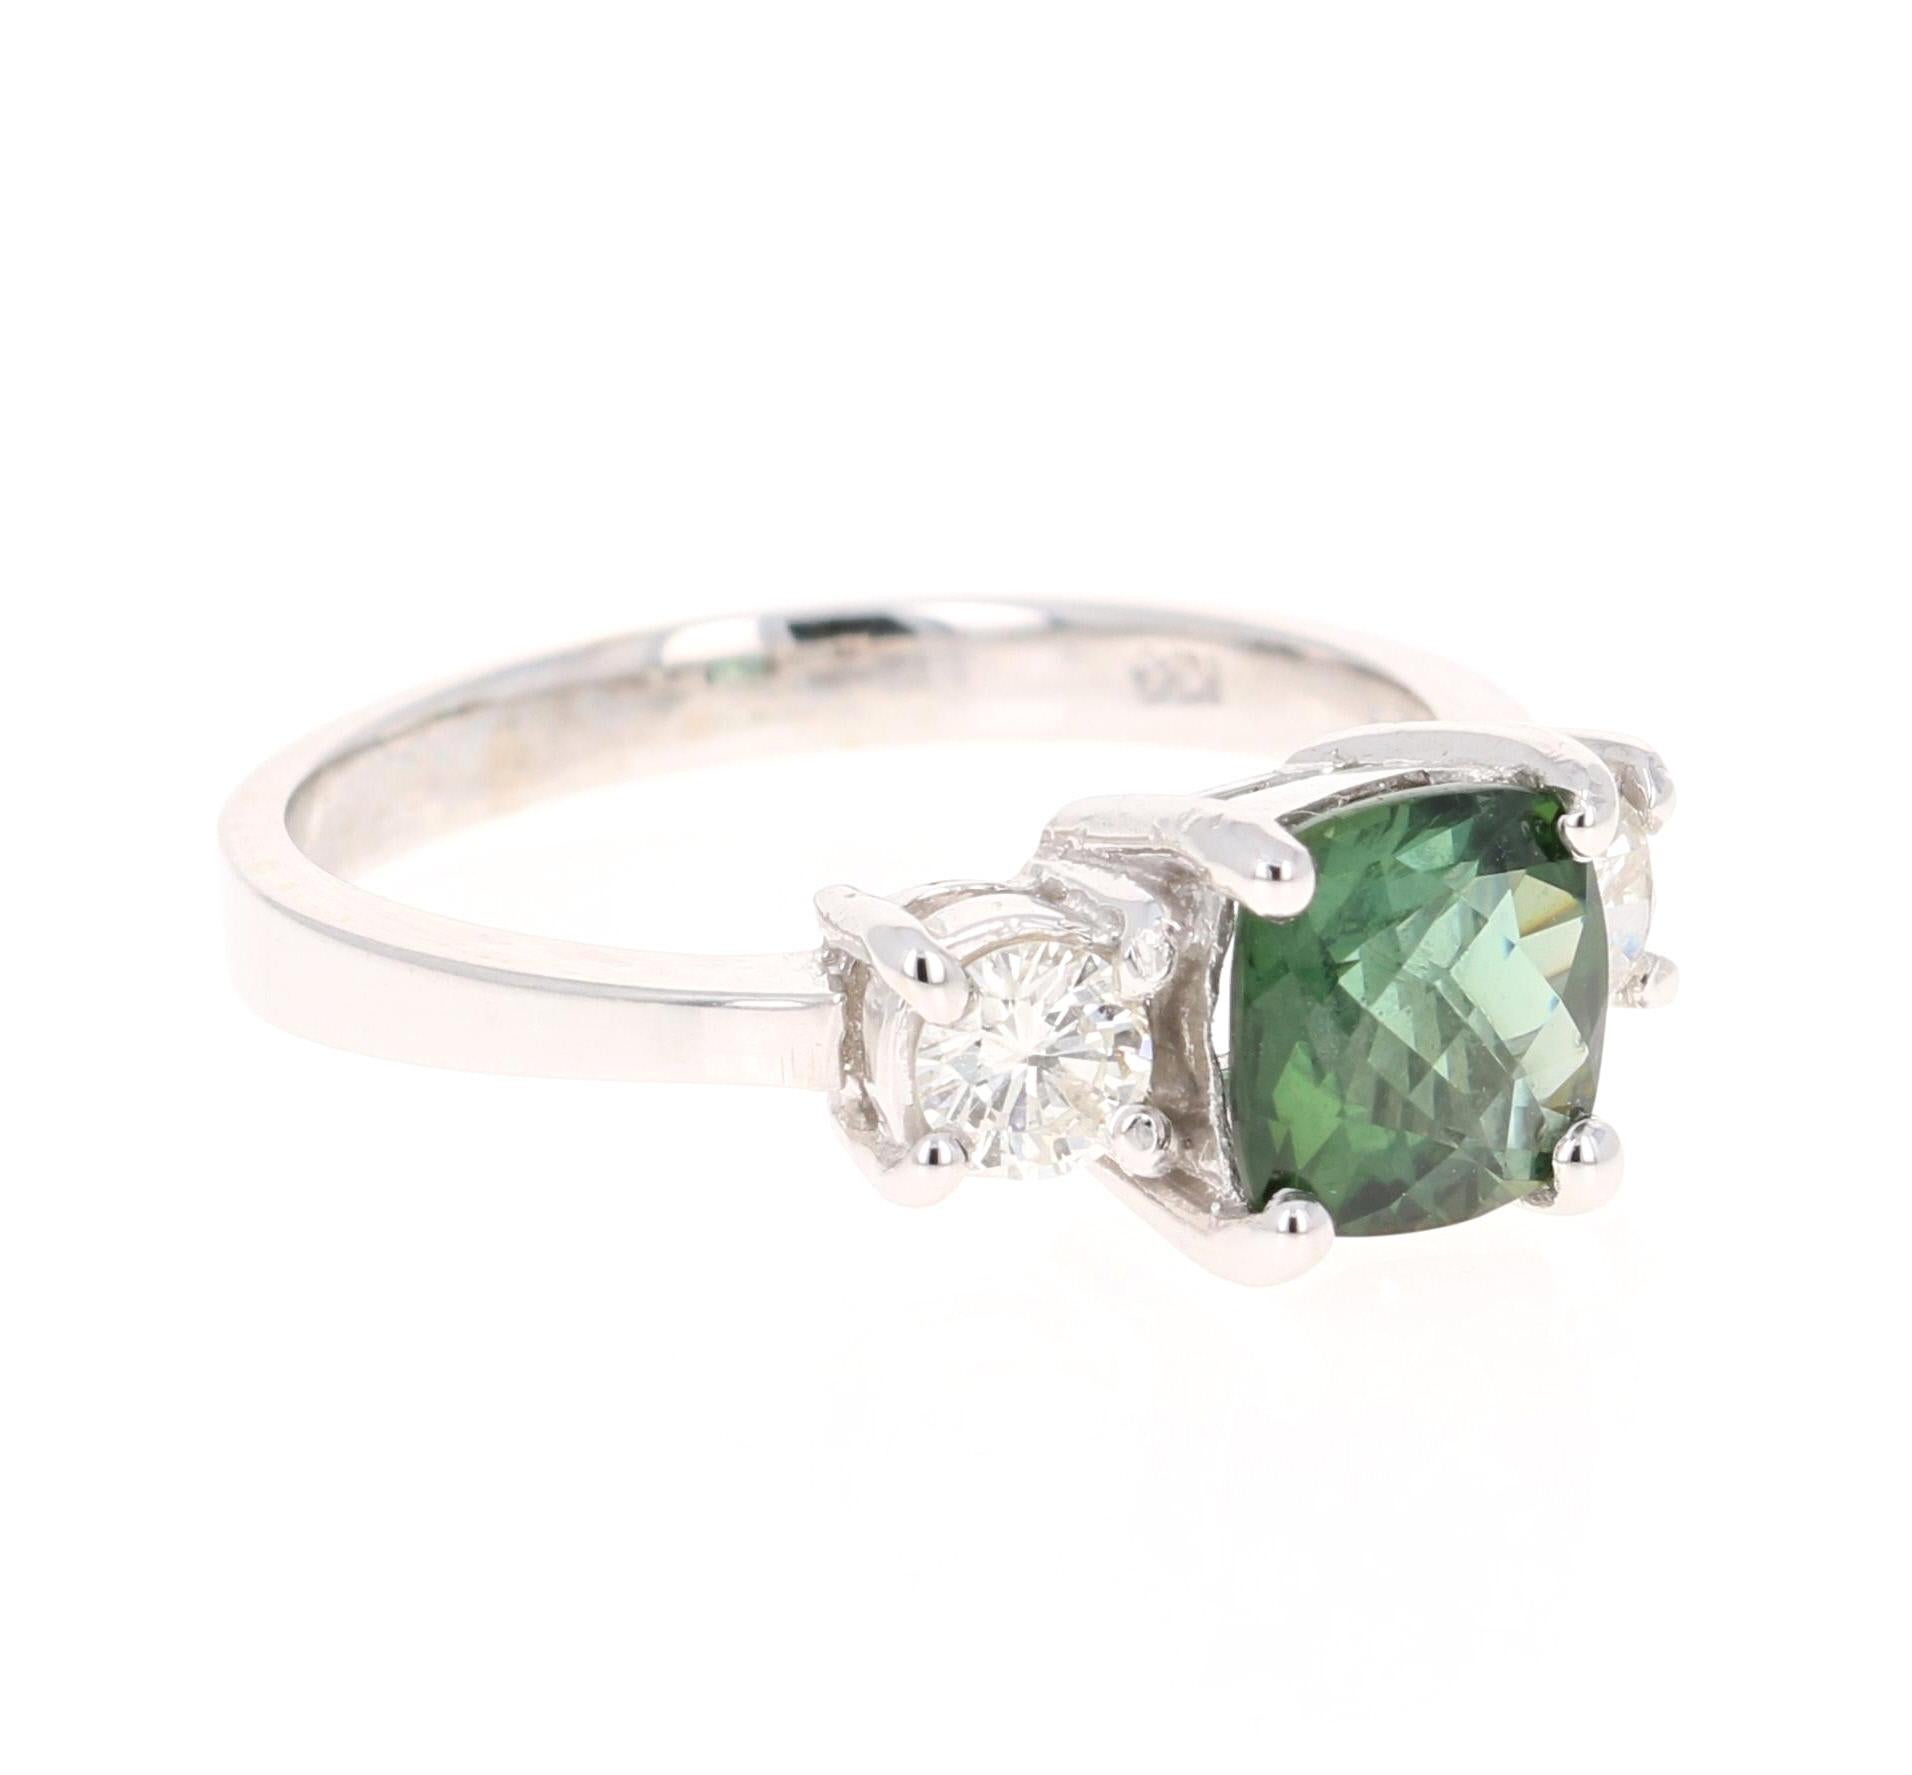 This ring has a mesmerizing Cushion cut Green Tourmaline weighing 1.42 Carats and 2 Round Cut Diamonds weighing 0.38 Carats. The total carat weight of the ring is 1.80 Carats. 

It is set in 14K White Gold and weighs approximately 3.6 grams. 

The